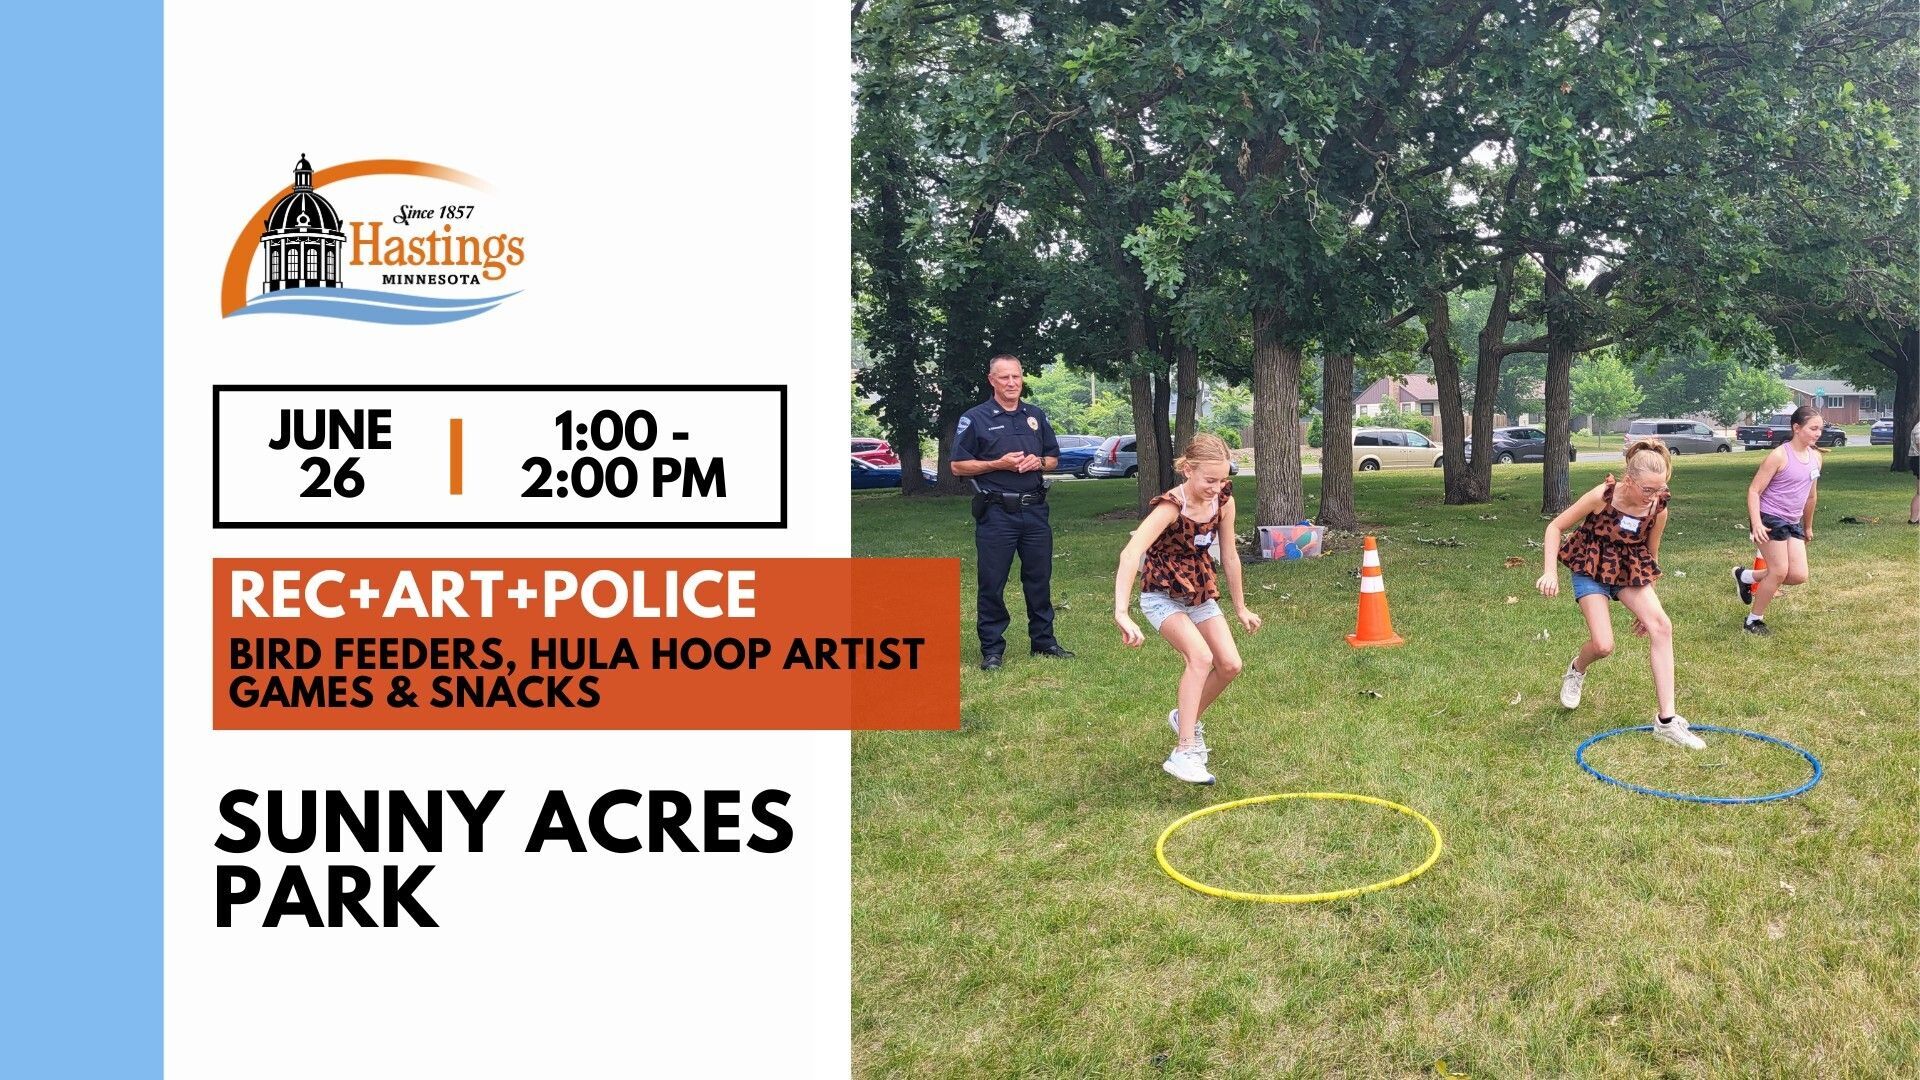 Kids jumping into hula hoops on the park's lawn, text bird feeders, hula hoop artist, games, and snacks, City of Hastings logo and date June 26, 1 to 2 pm.